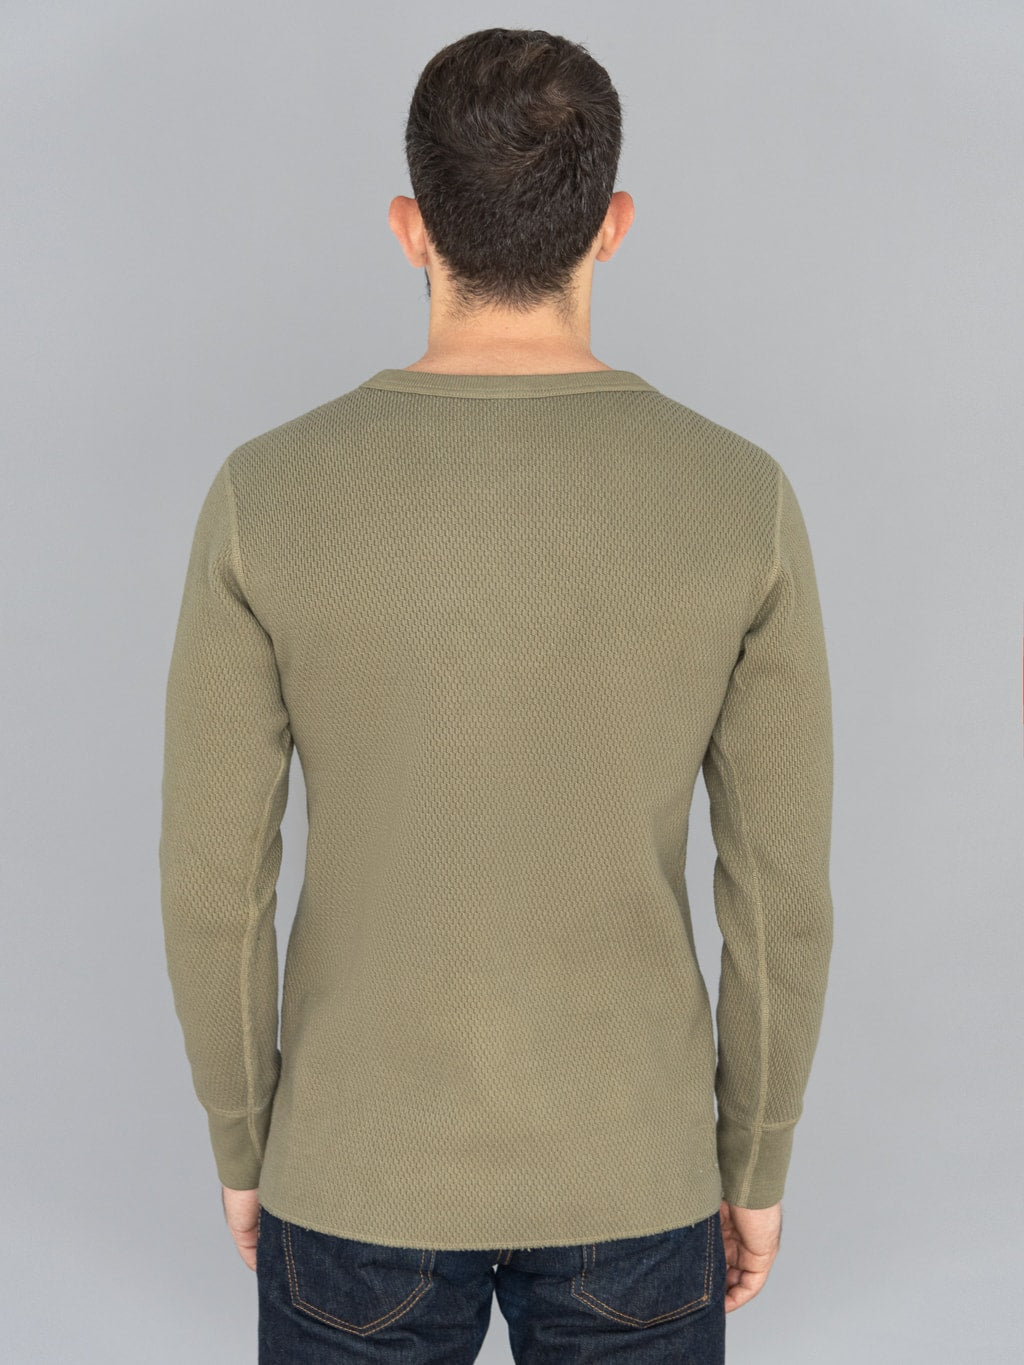 UES Double Honeycomb Thermal TShirt Olive back model fit